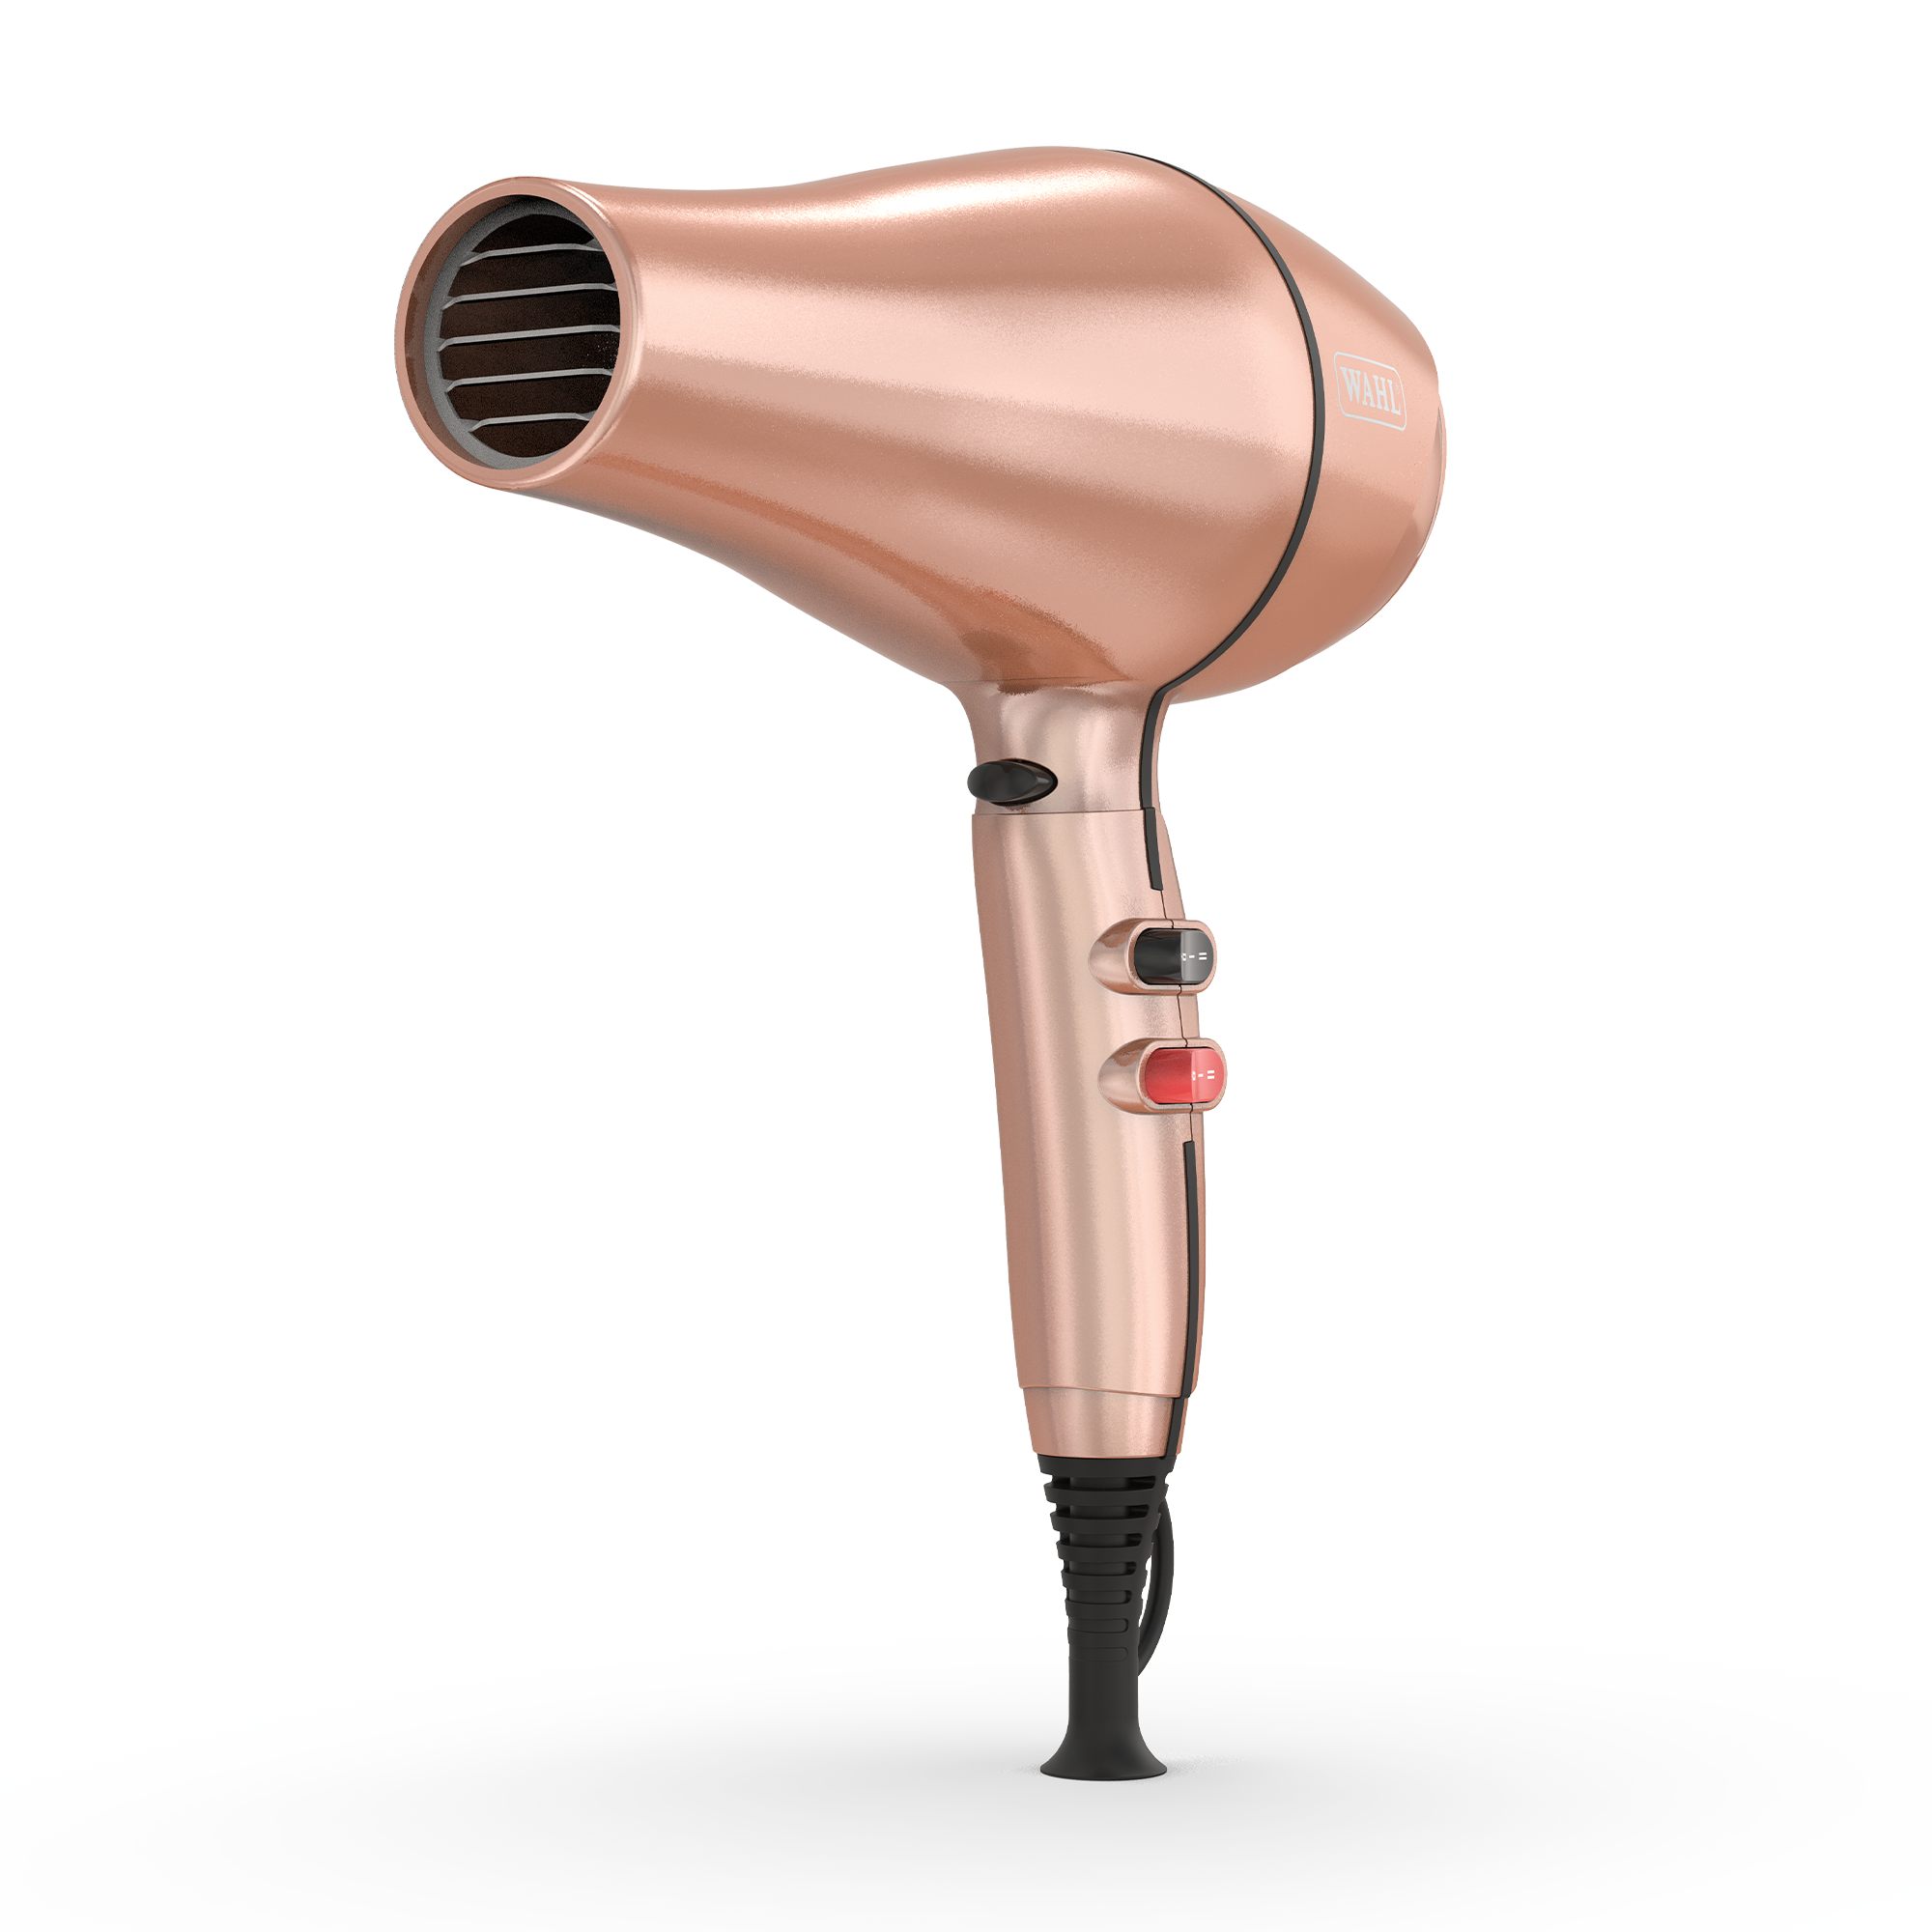 ZY099-RoseGold-KeratinDryer2200W-Angle-HighPNG_1.png